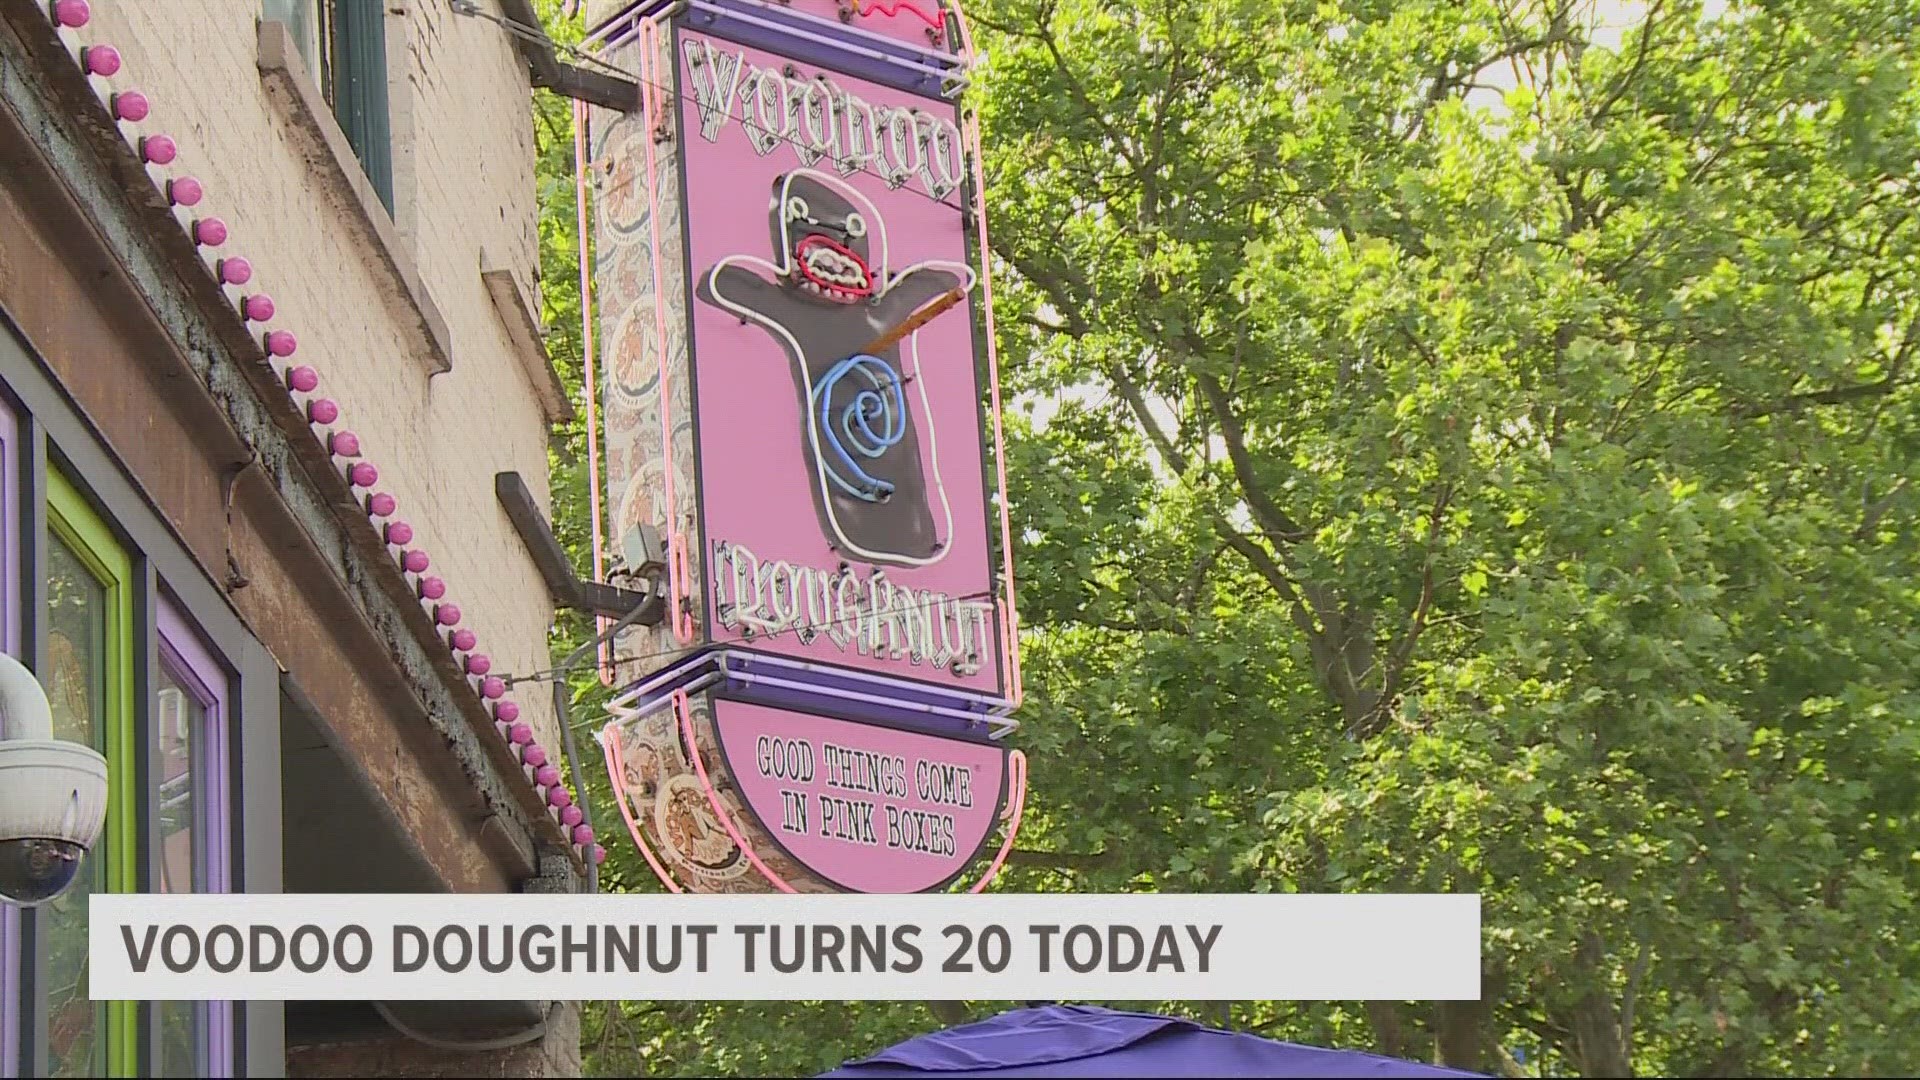 Voodoo Doughnut started as a small shop in Portland's Old Town and has grown into one of the city's most recognized brands. Drew Carney spoke with the owners.